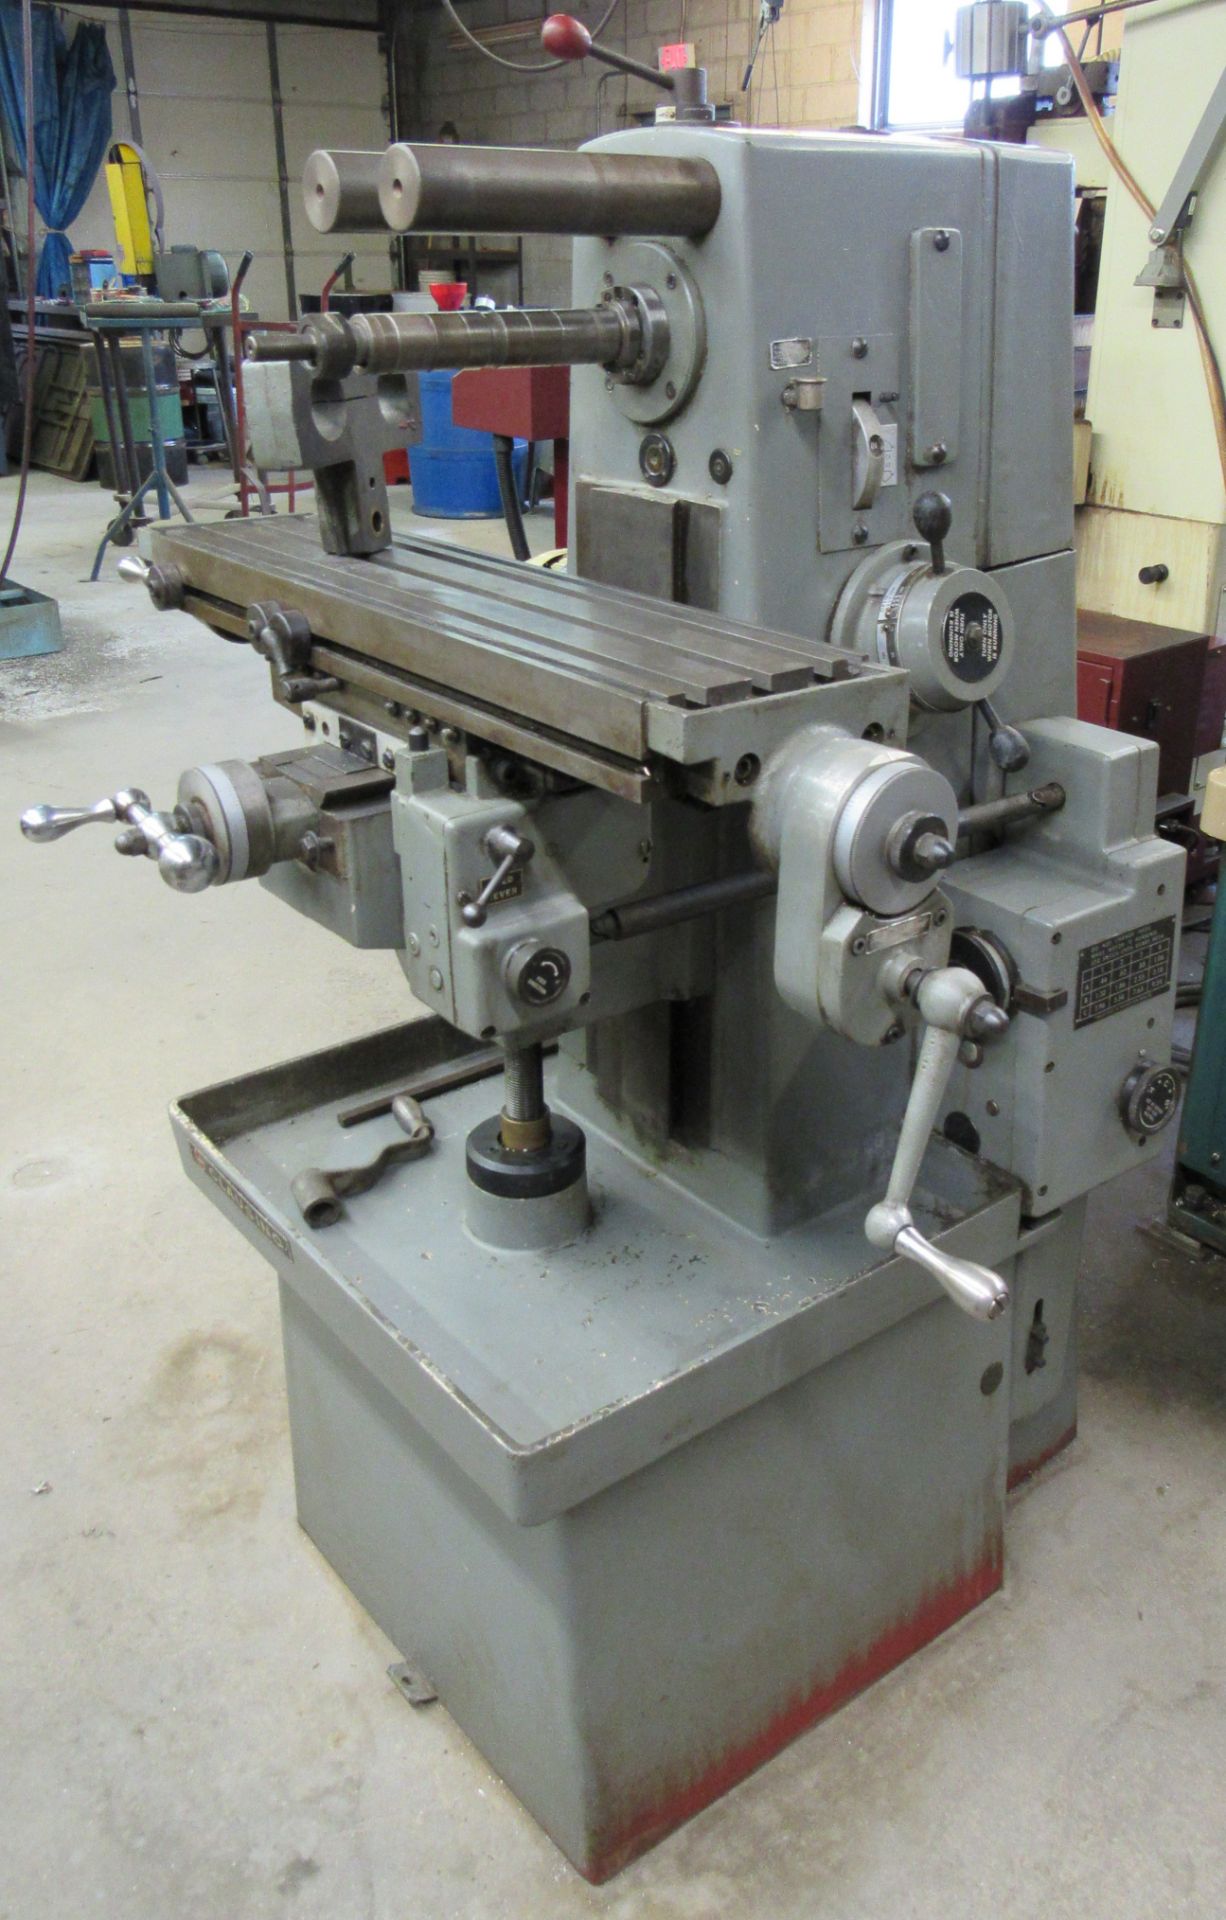 Clausing Mod.8540 Horizontal Power-Feed Milling Machine - S/N 800949 - Image 2 of 3